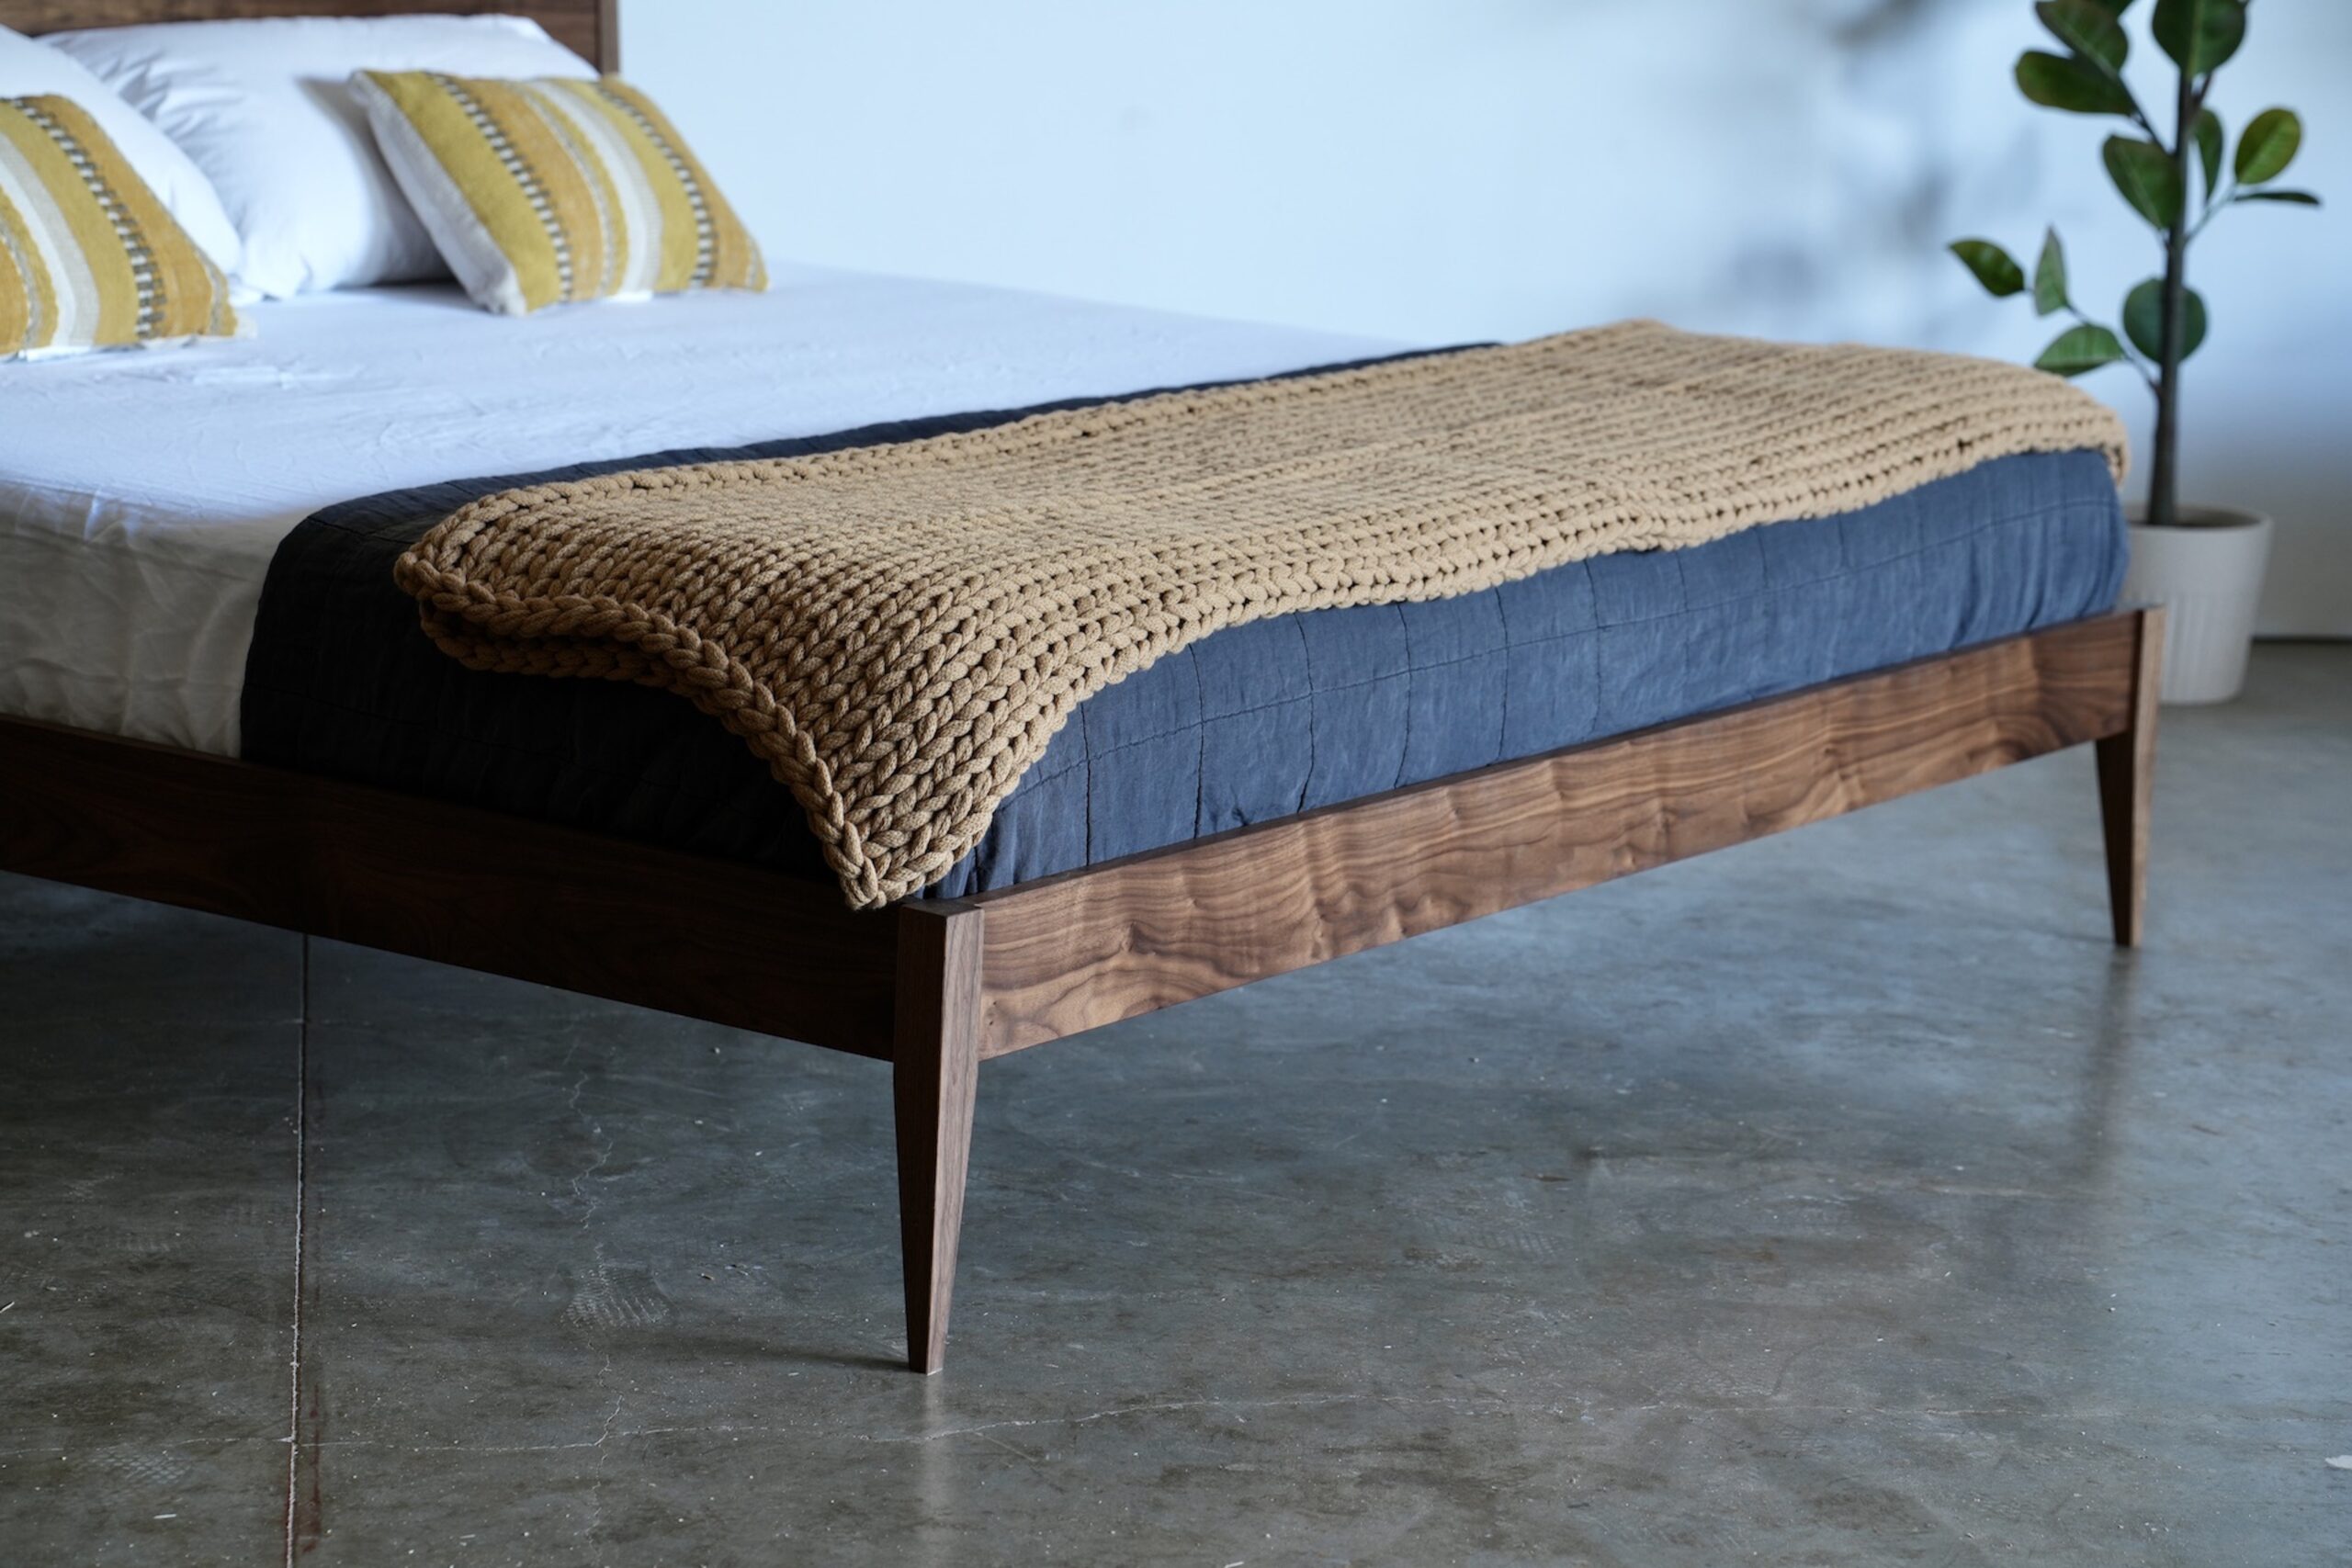 A close-up of the end of a walnut shaker style midcentury modern bed with tapered legs. A mattress, pillows, and a throw blankets are on the bed.